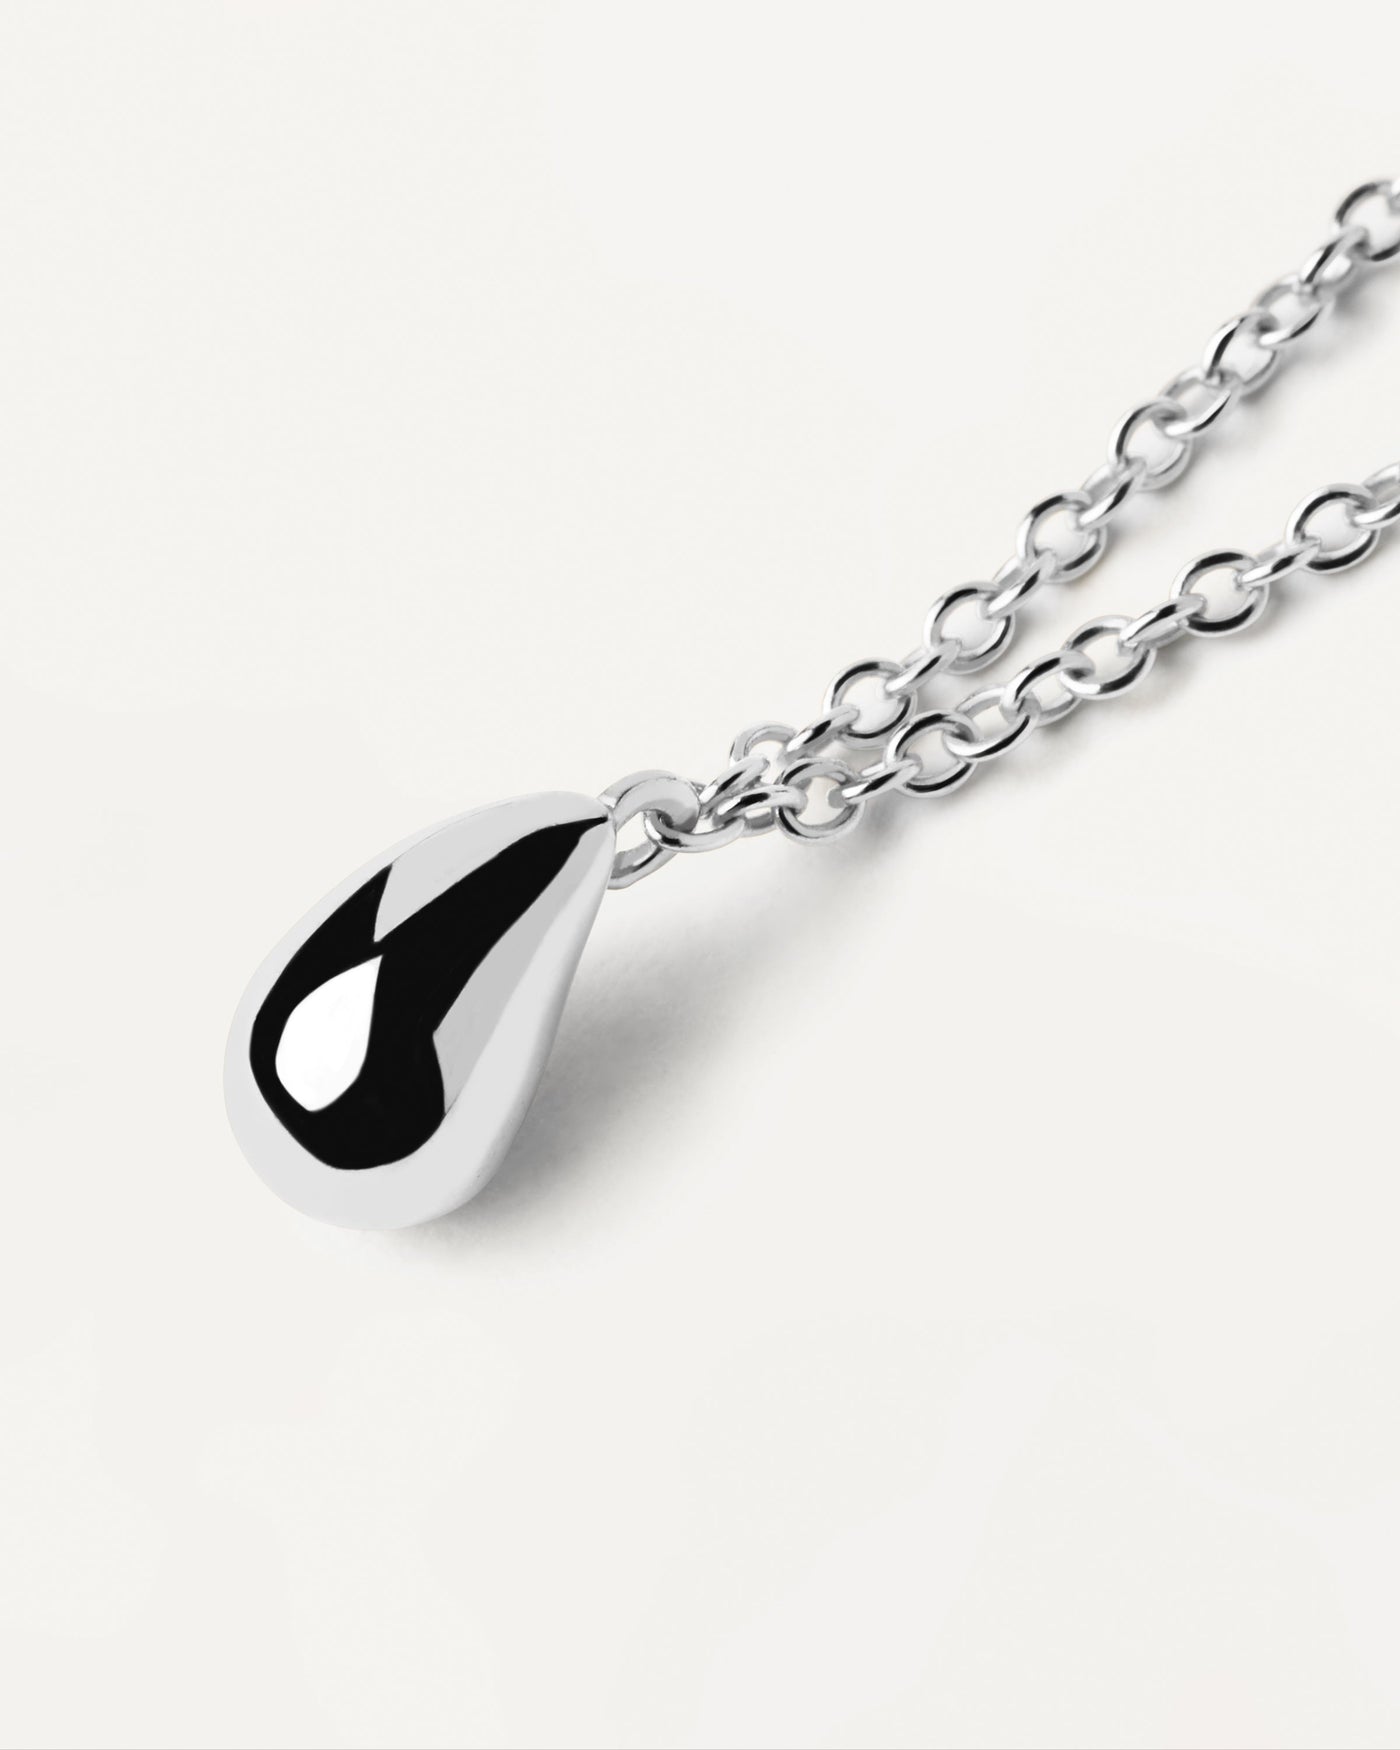 2023 Selection | Drop Silver Necklace. Sterling silver necklace with drop shape pendant. Get the latest arrival from PDPAOLA. Place your order safely and get this Best Seller. Free Shipping.